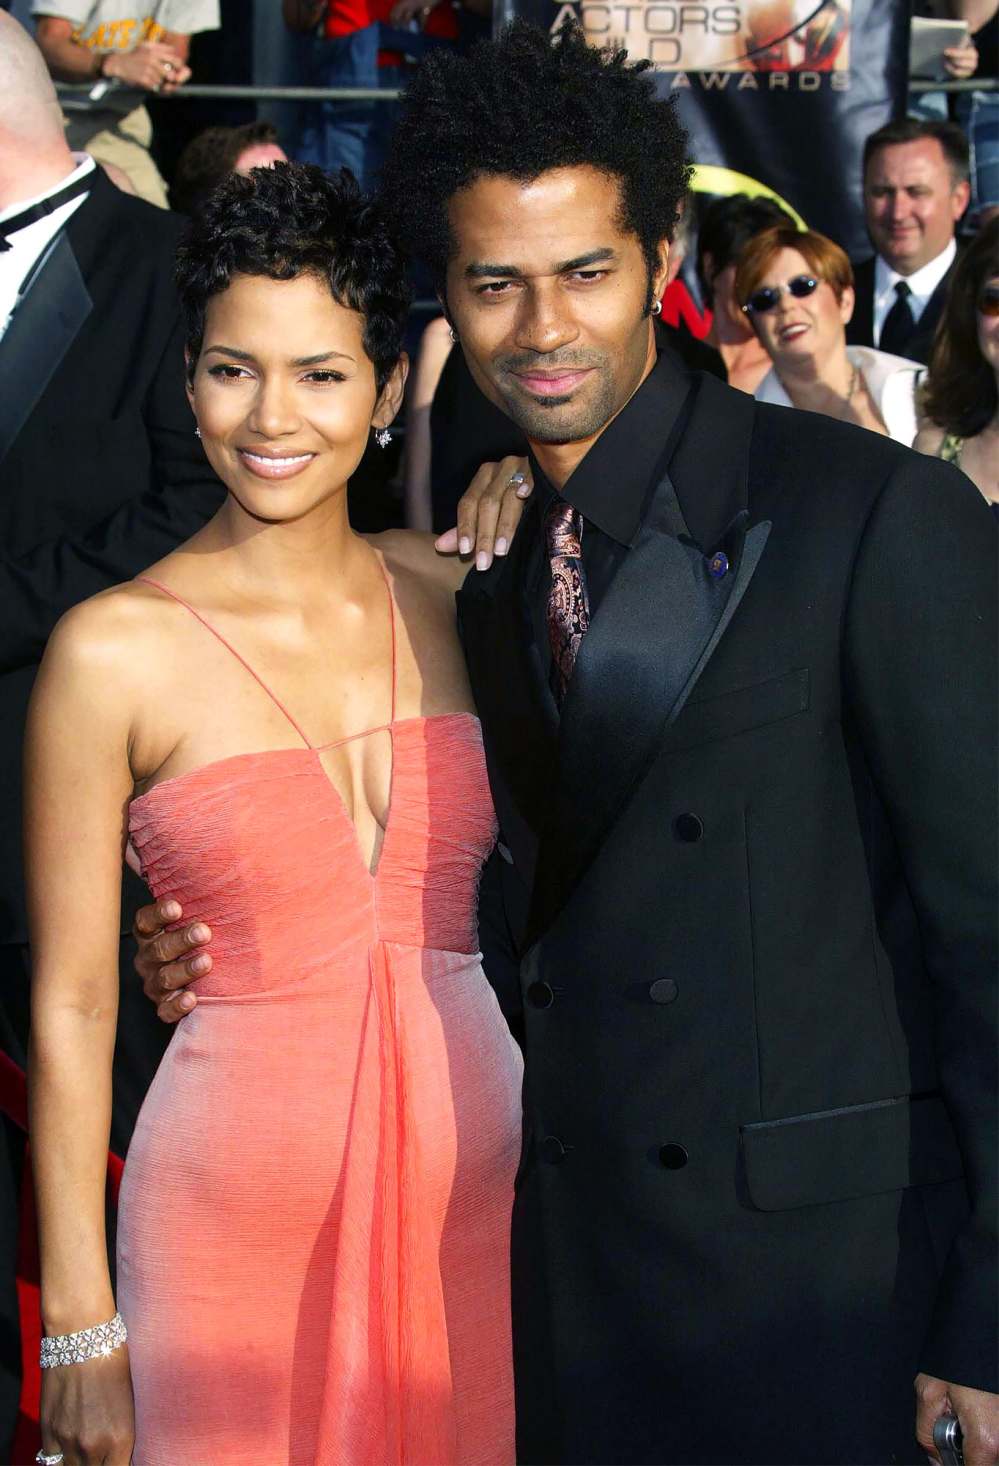 Halle-Berrys-Ex-Eric-Benet-Reacts-to-David-Justices-Twitter-Rant-My-Man-Is-Tweeting-Some-Truth-Halle-Berry-and-Eric-Benet